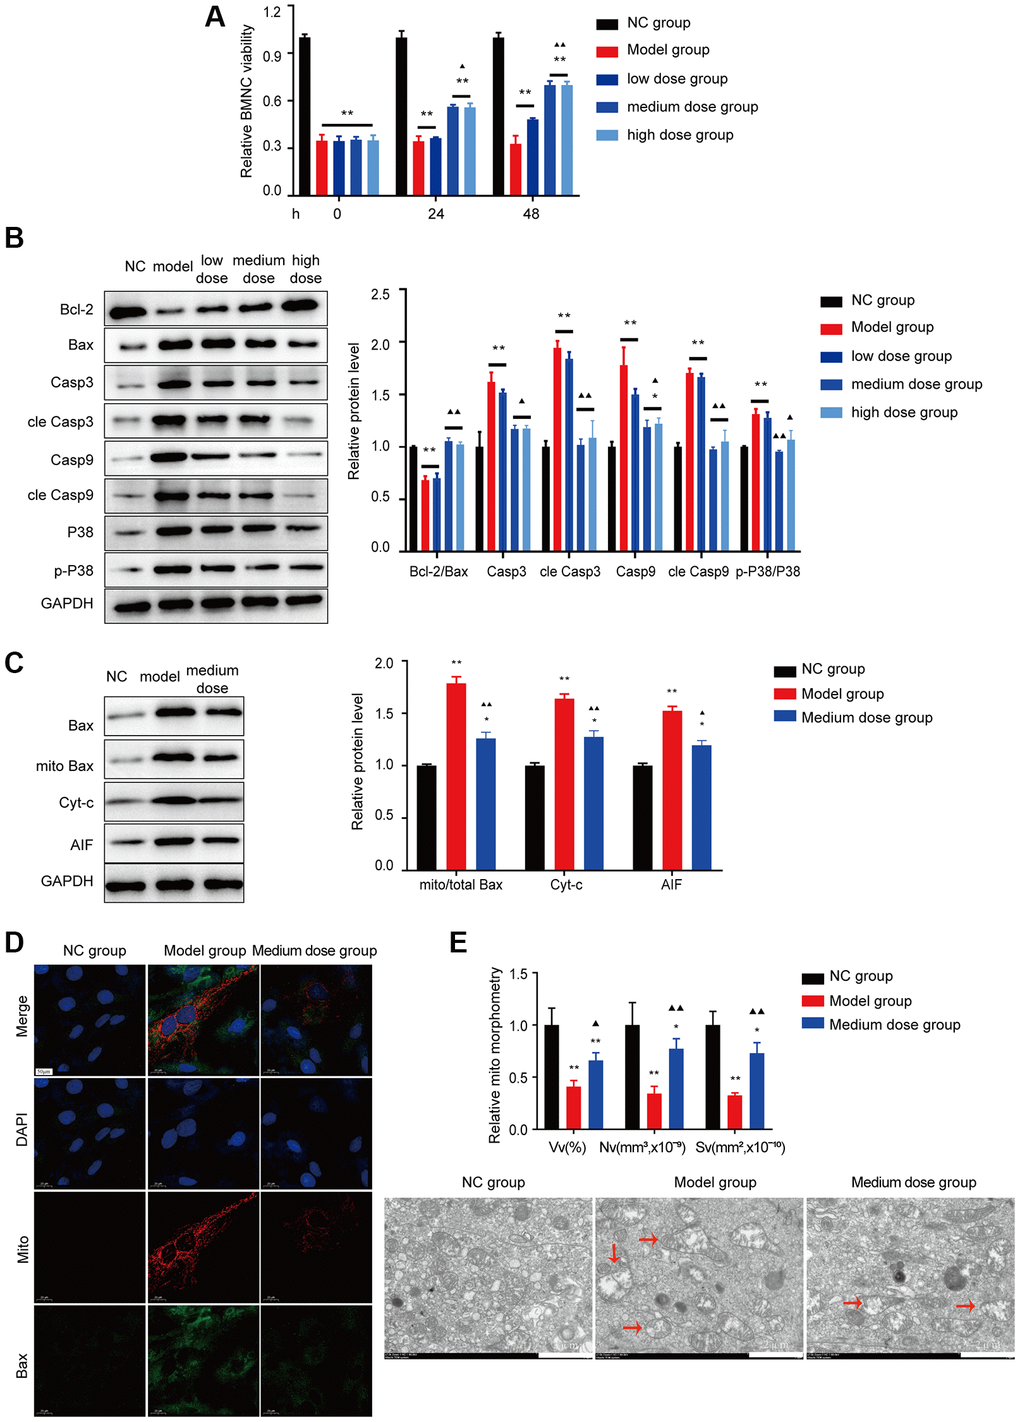 Effects of ASP on apoptosis in vitro. (A) BMNC cell viability was tested in vitro. (B) Markers of Bcl-2/Bax pathway apoptosis and the p38/MAPK signaling pathway were tested using Western blotting in BMNC cells. (C) Markers of Bax-associated mitochondrial apoptosis pathway were tested after treated with medium dose ASP. (D) The colocalization of Bax with mitochondria (yellow dots). (E) Mitochondrial structure was detected by electron microscopy. Note: *P **P ▲P ▲▲P 